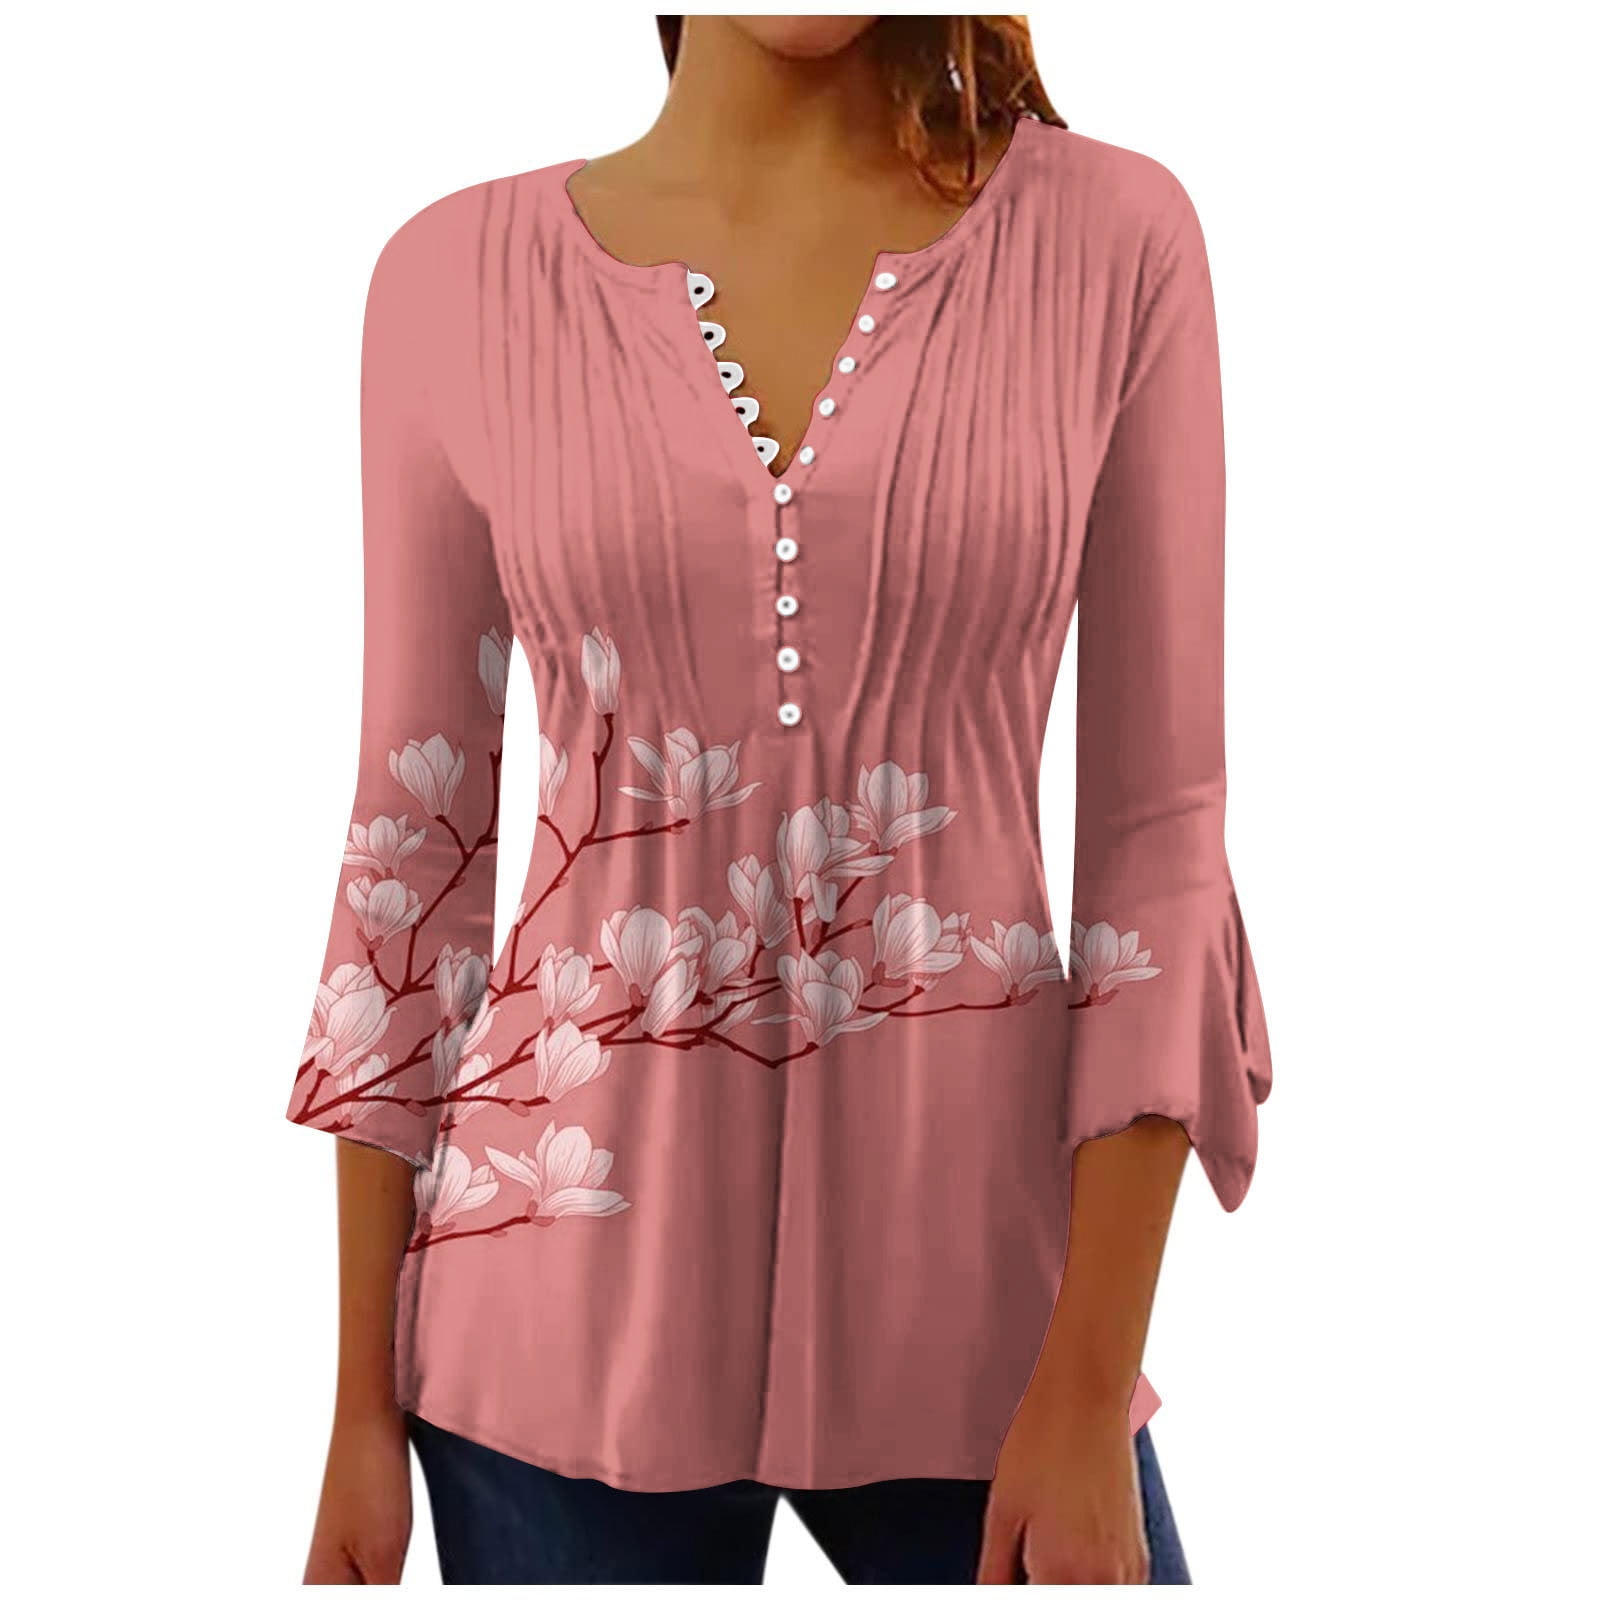 Tunic Casual Crew L Trumpet Neck Blouses VSSSJ 3/4 Printed Up Comfy Shirts Women Pullover Tops for Button Ruched Sleeve Pink Daily Floral